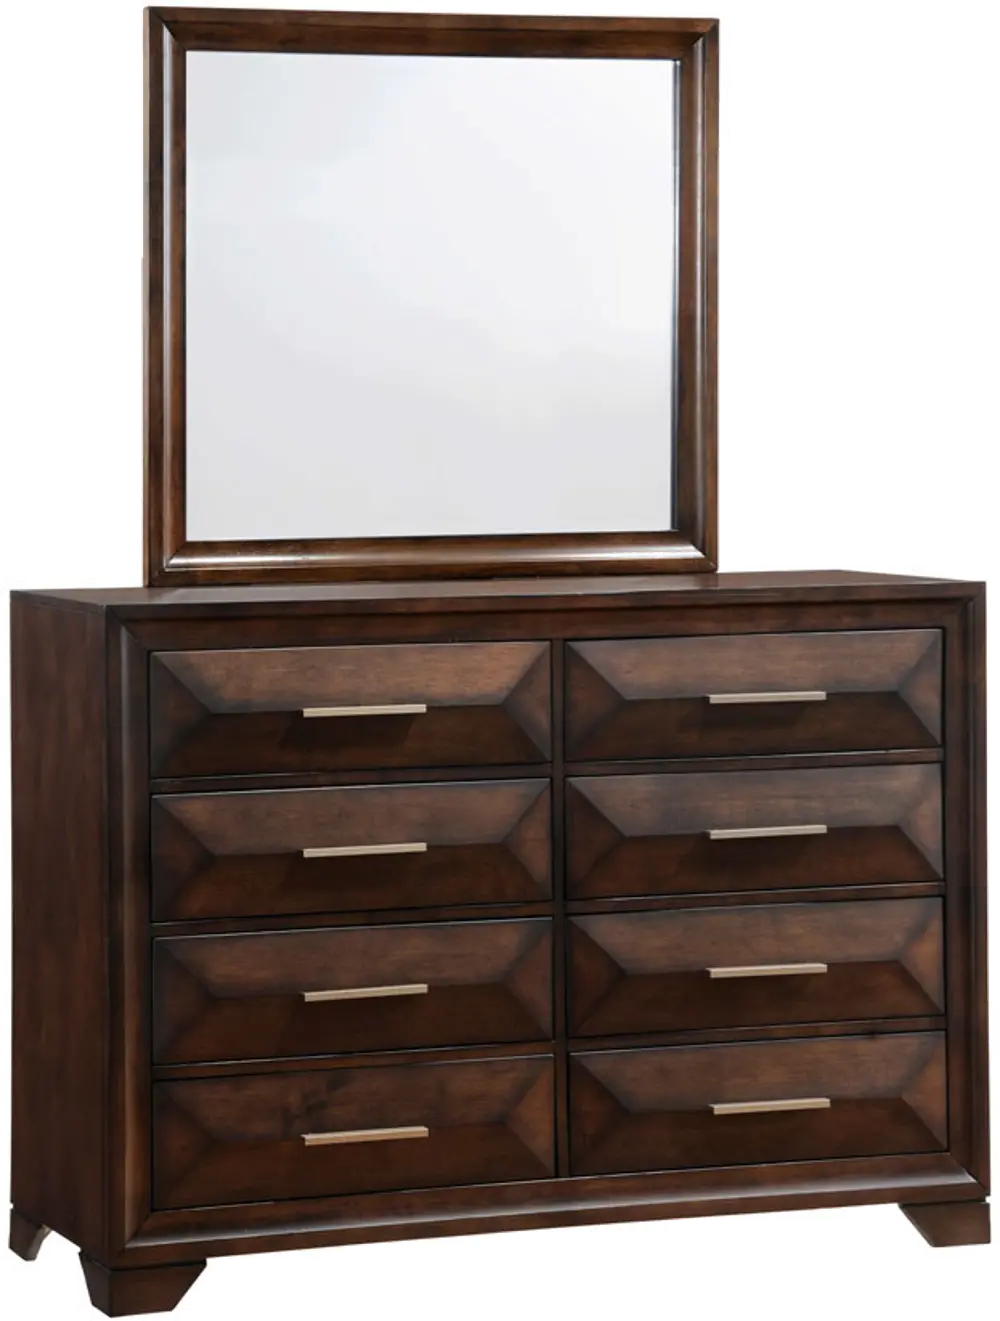 Tobacco Brown Classic Contemporary Dresser - Anthem-1